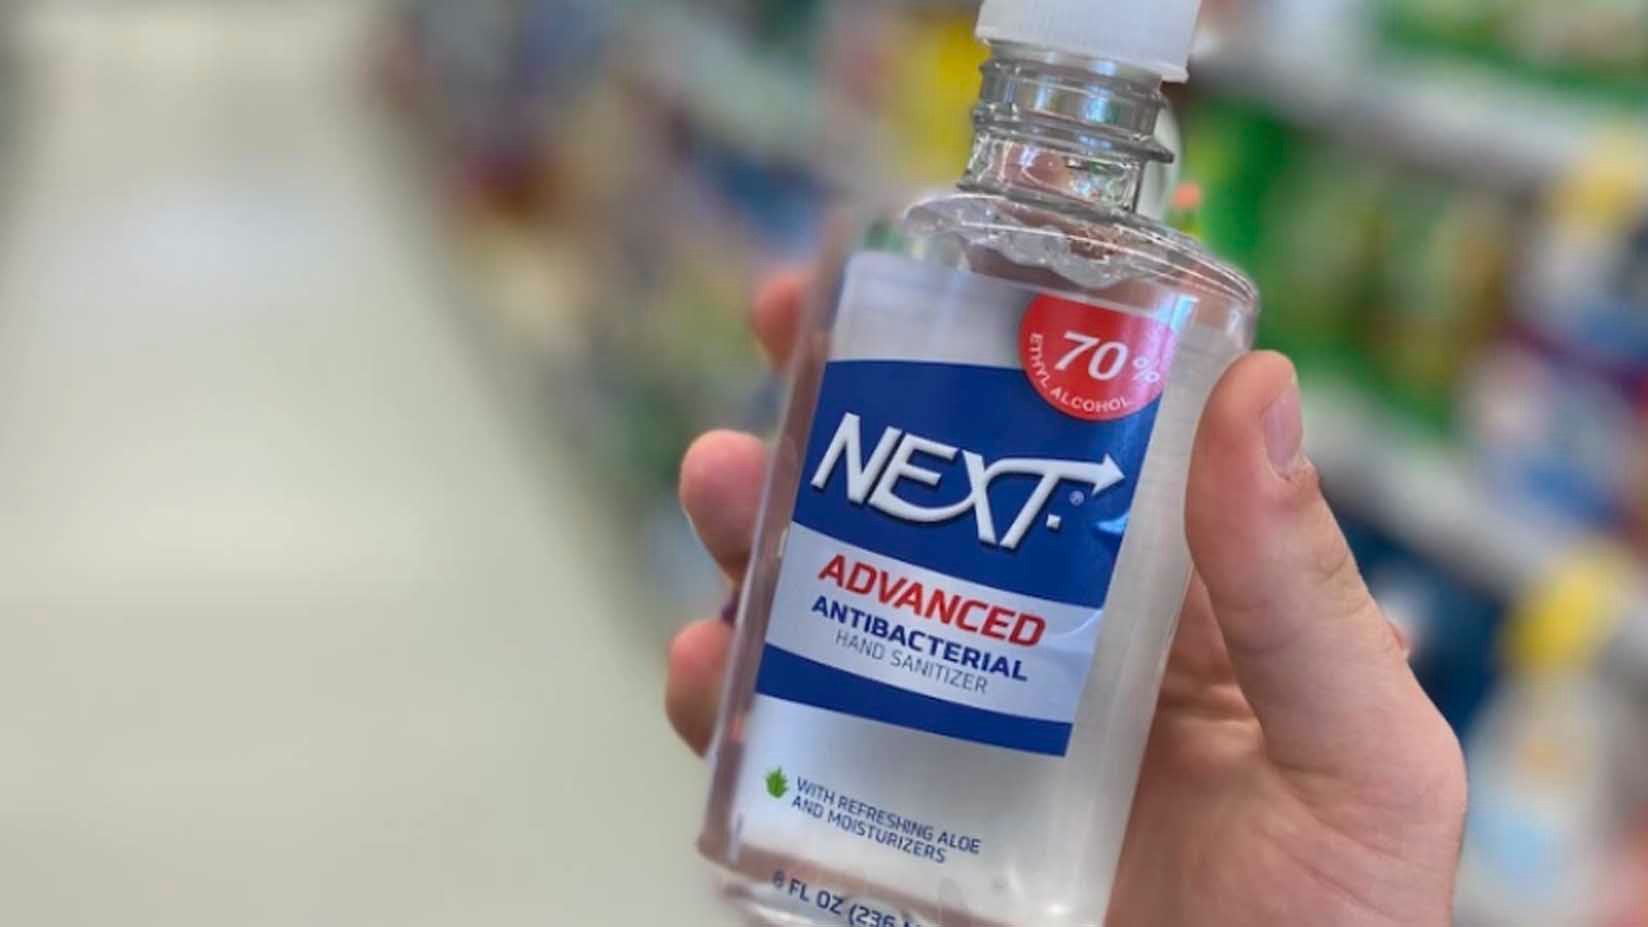 Mexican Hand Sanitizer Causes 'Nausea, Diarrhea, Vomiting, Abdominal Pain' And Is Recalled By FDA